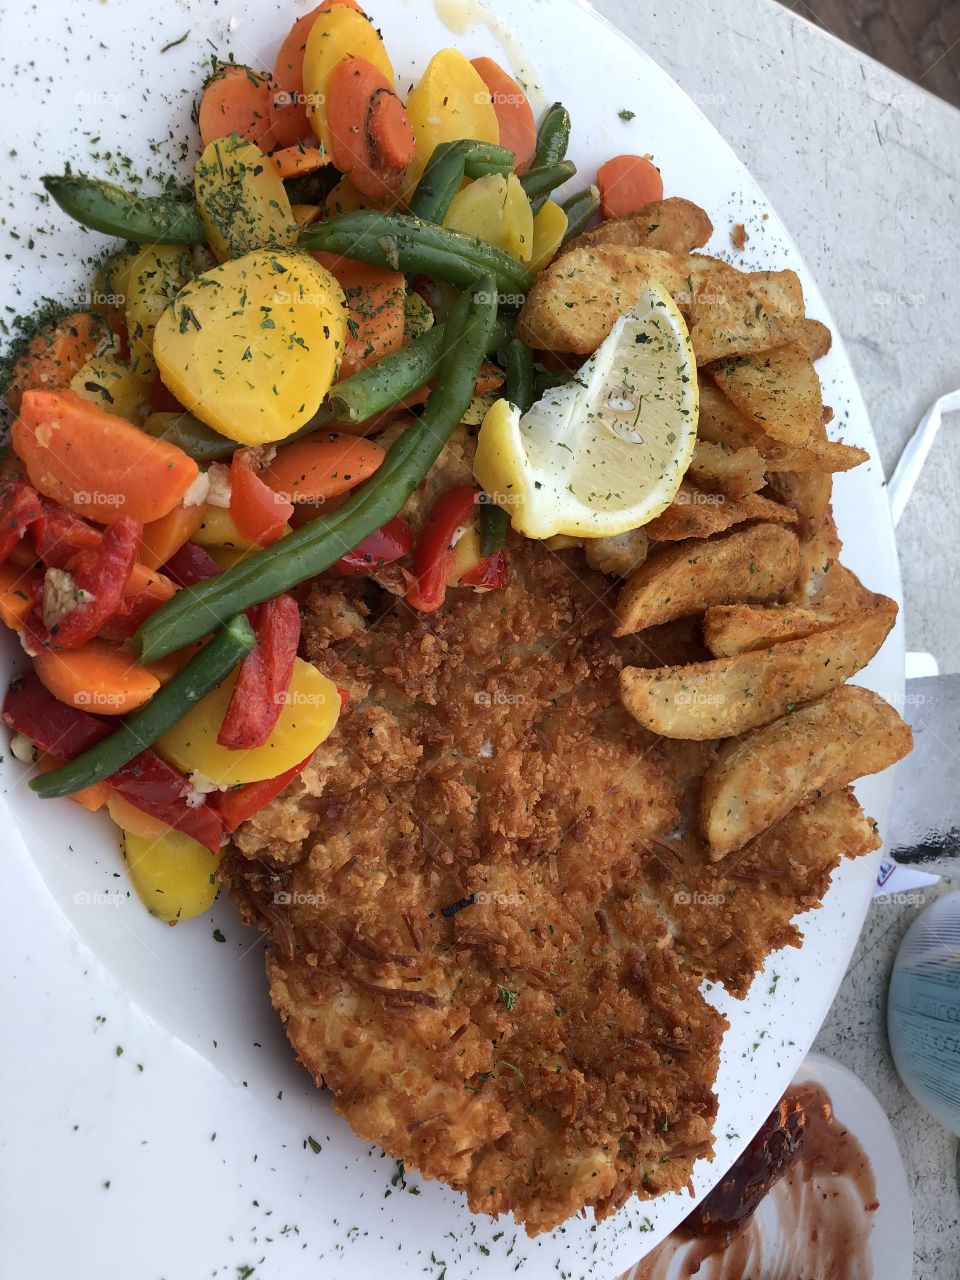 Coconut crusted fried snapper